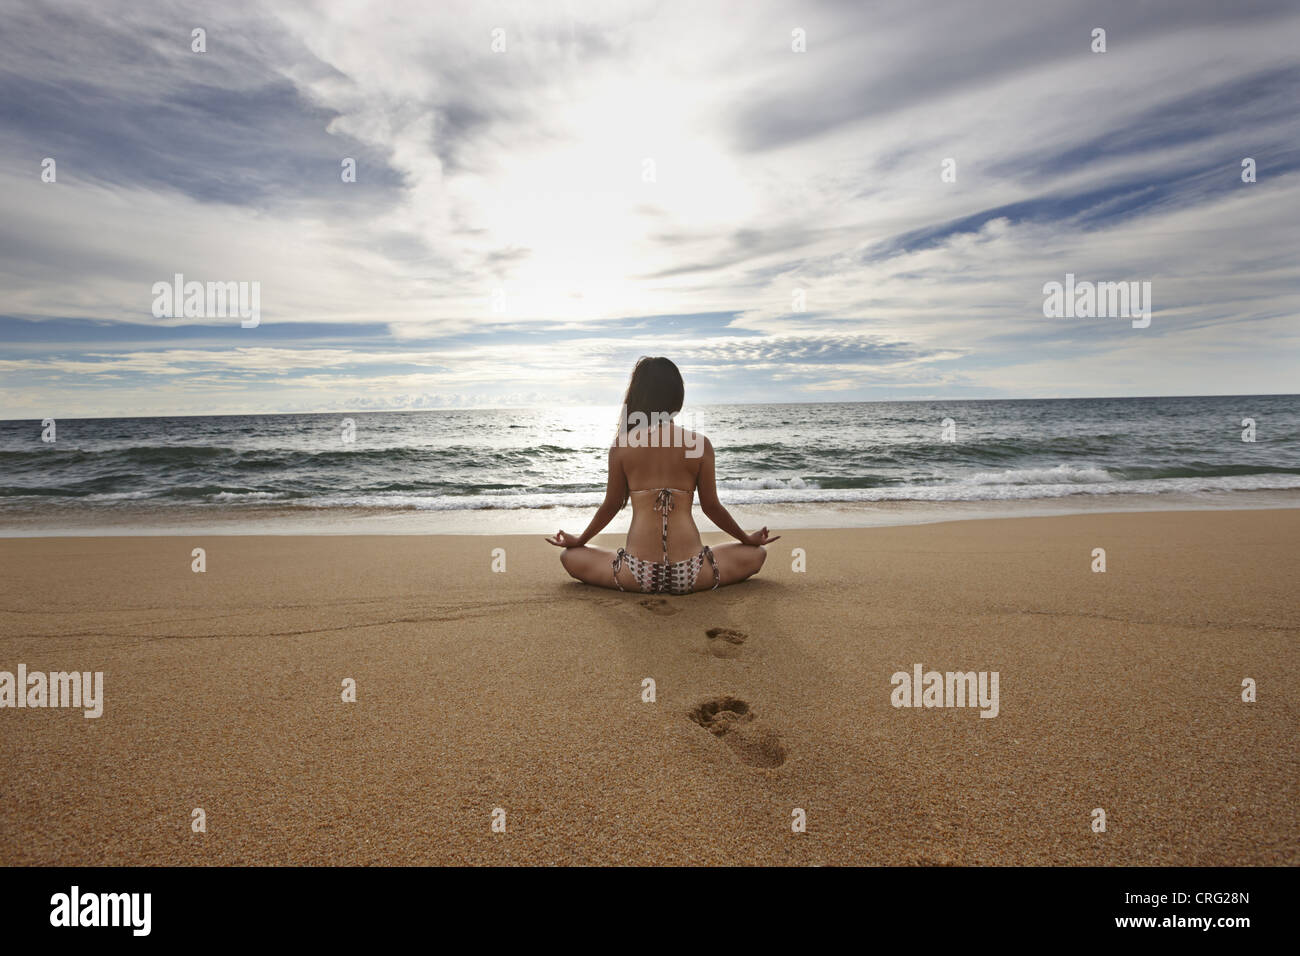 Woman meditating on sandy beach Banque D'Images